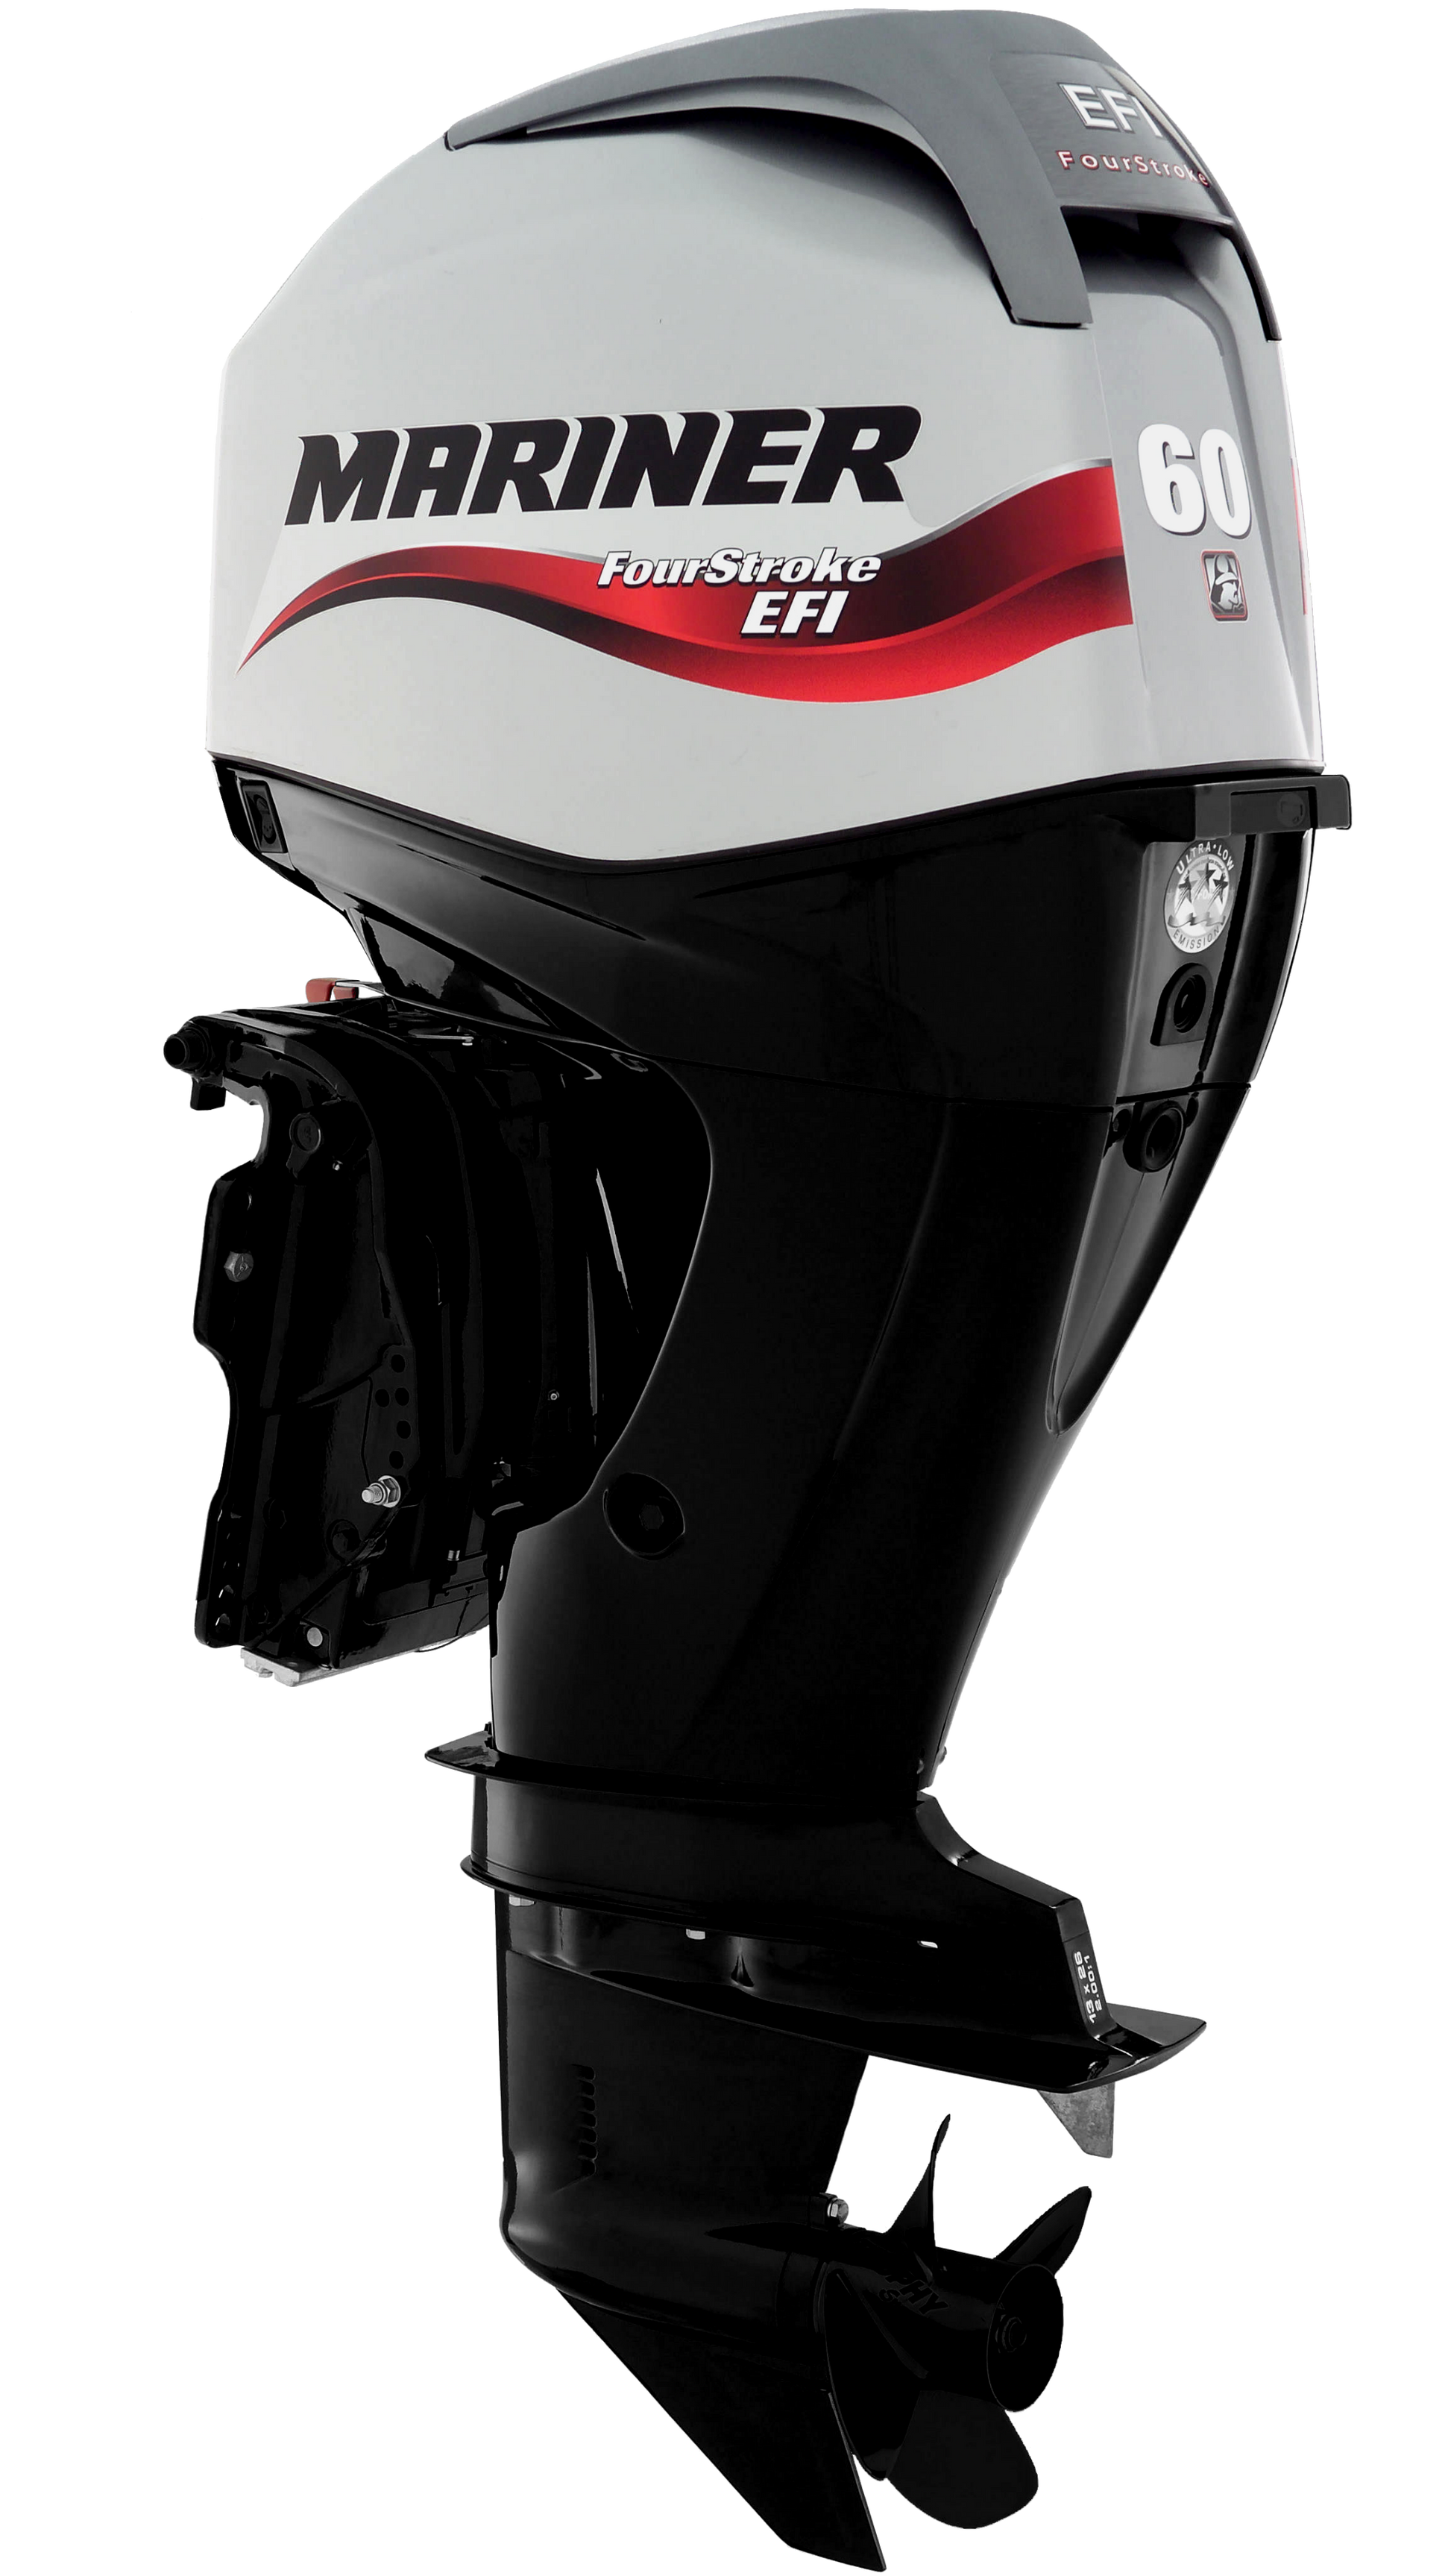 Mariner Four Stroke 60hp Outboard